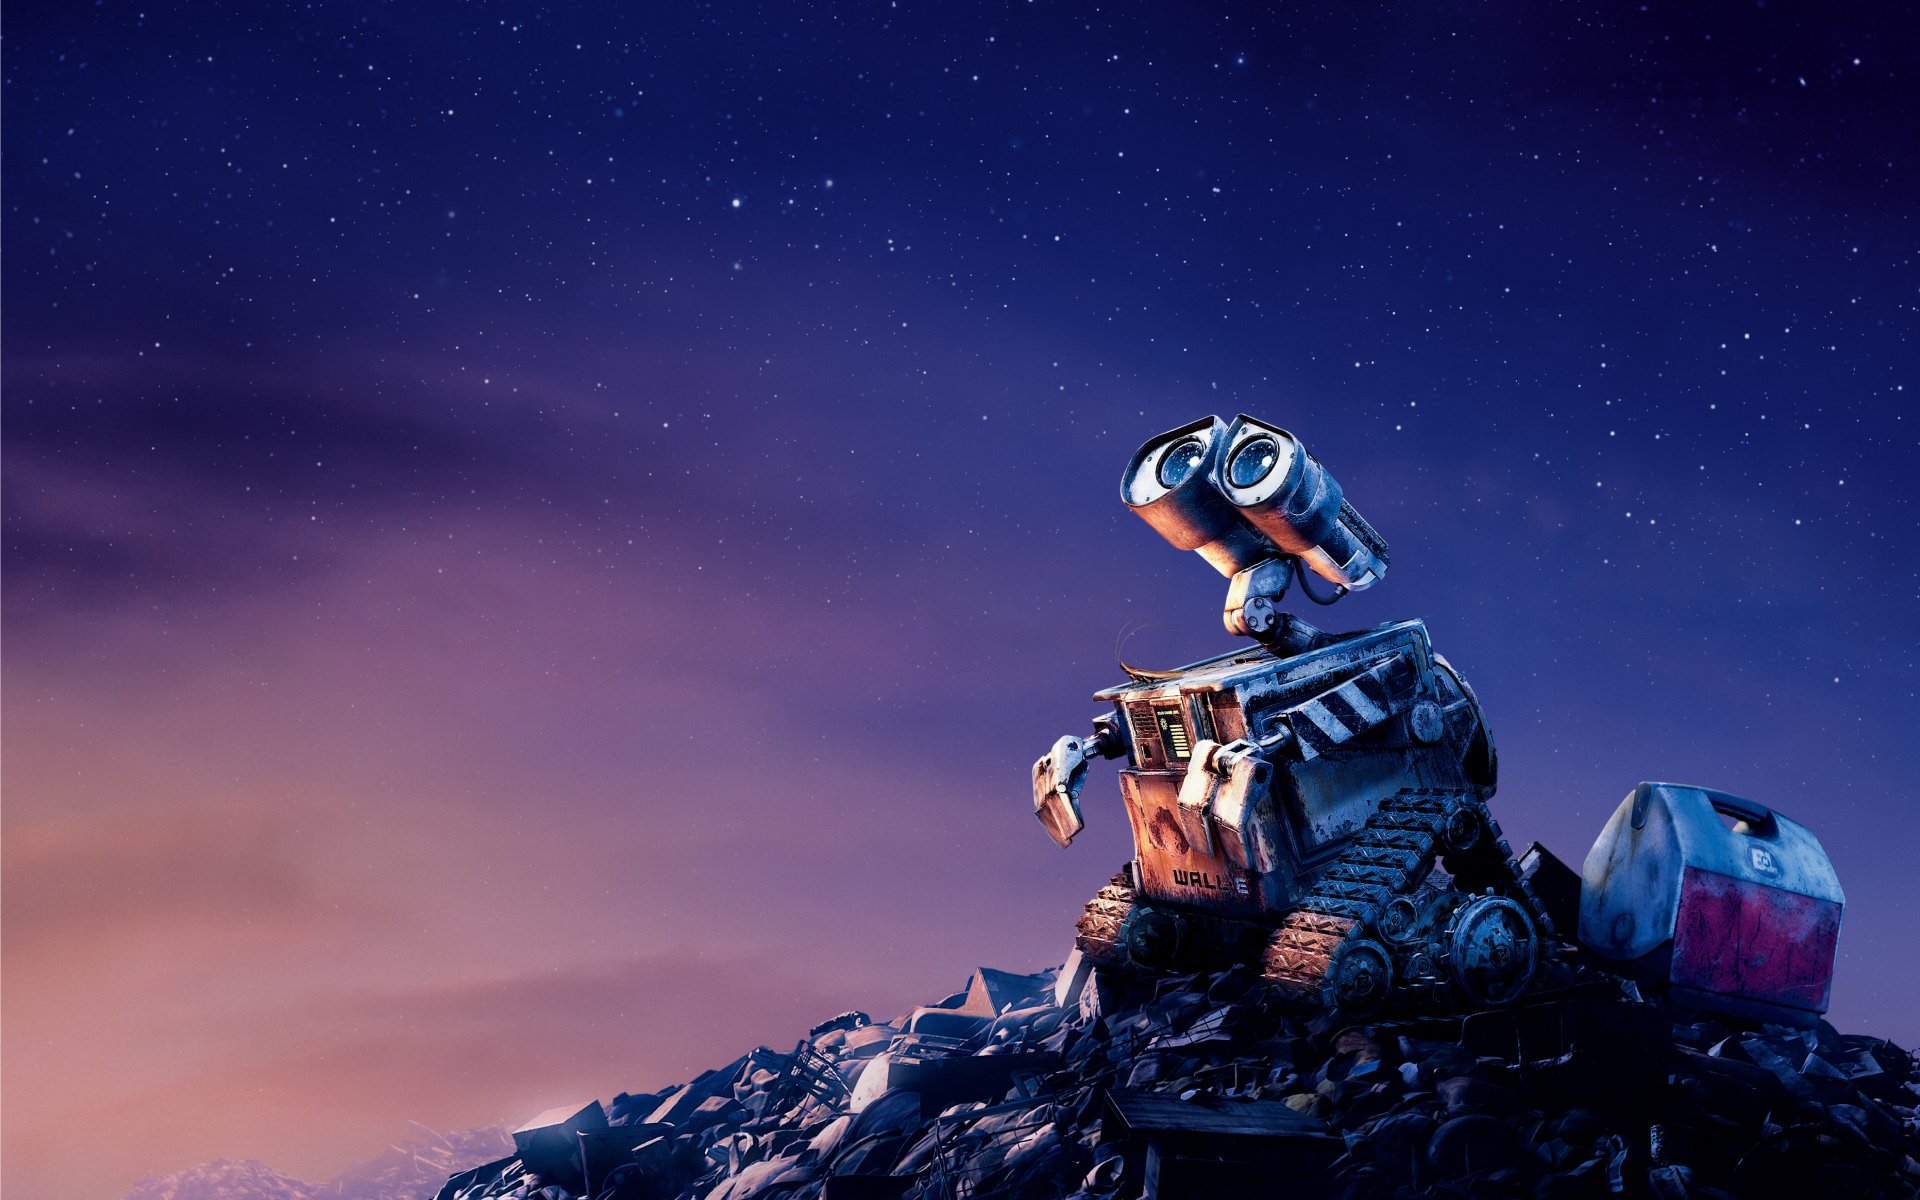 Wall-e Wallpaper Android